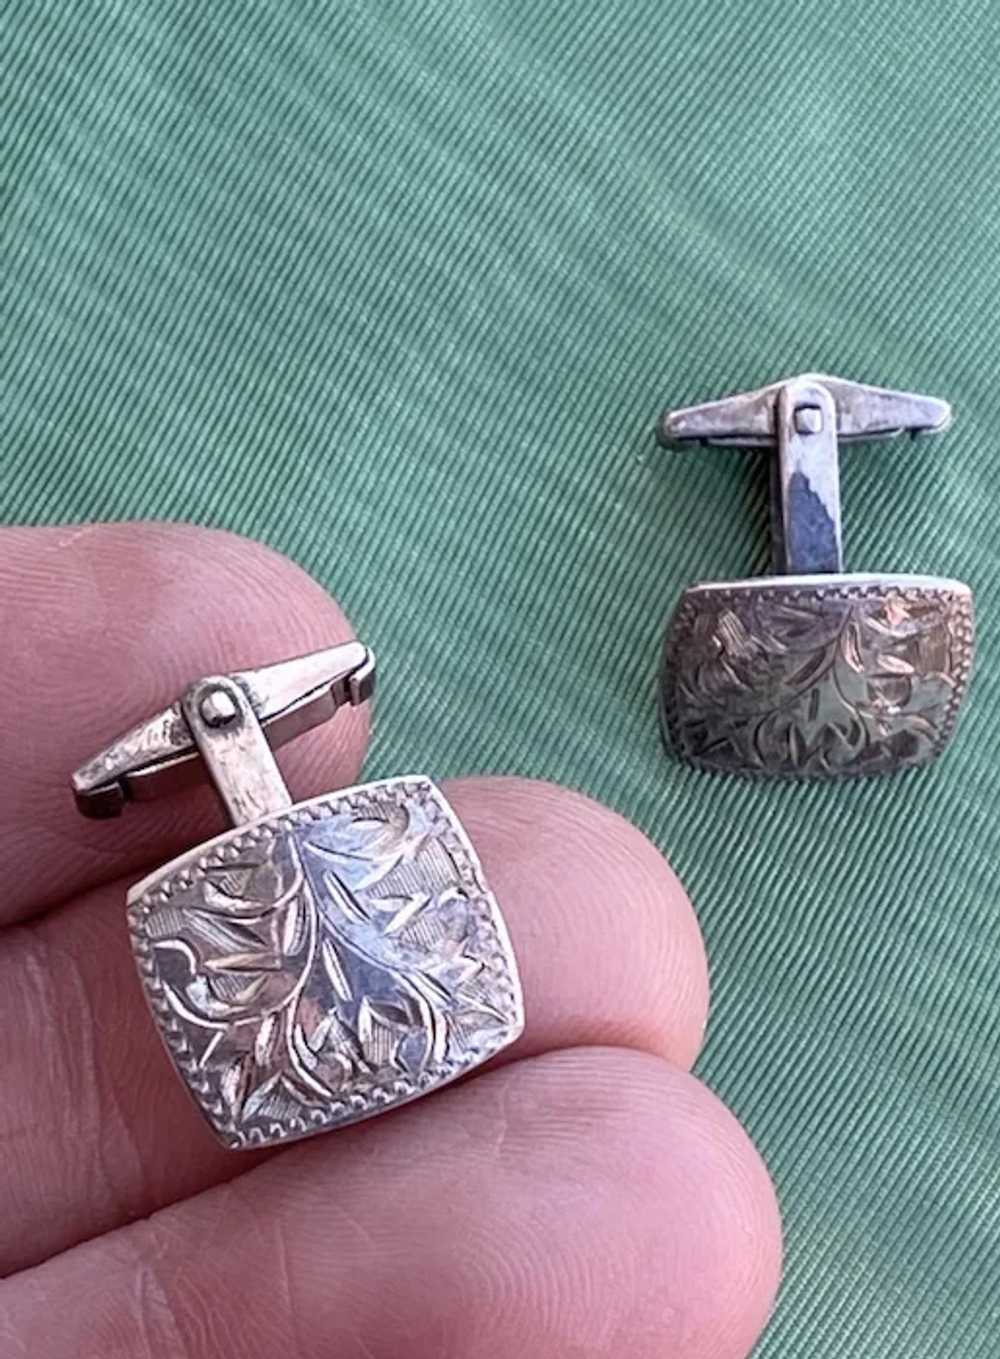 1950s 1960s Mens Silver Cufflinks Foliate Etched - image 2